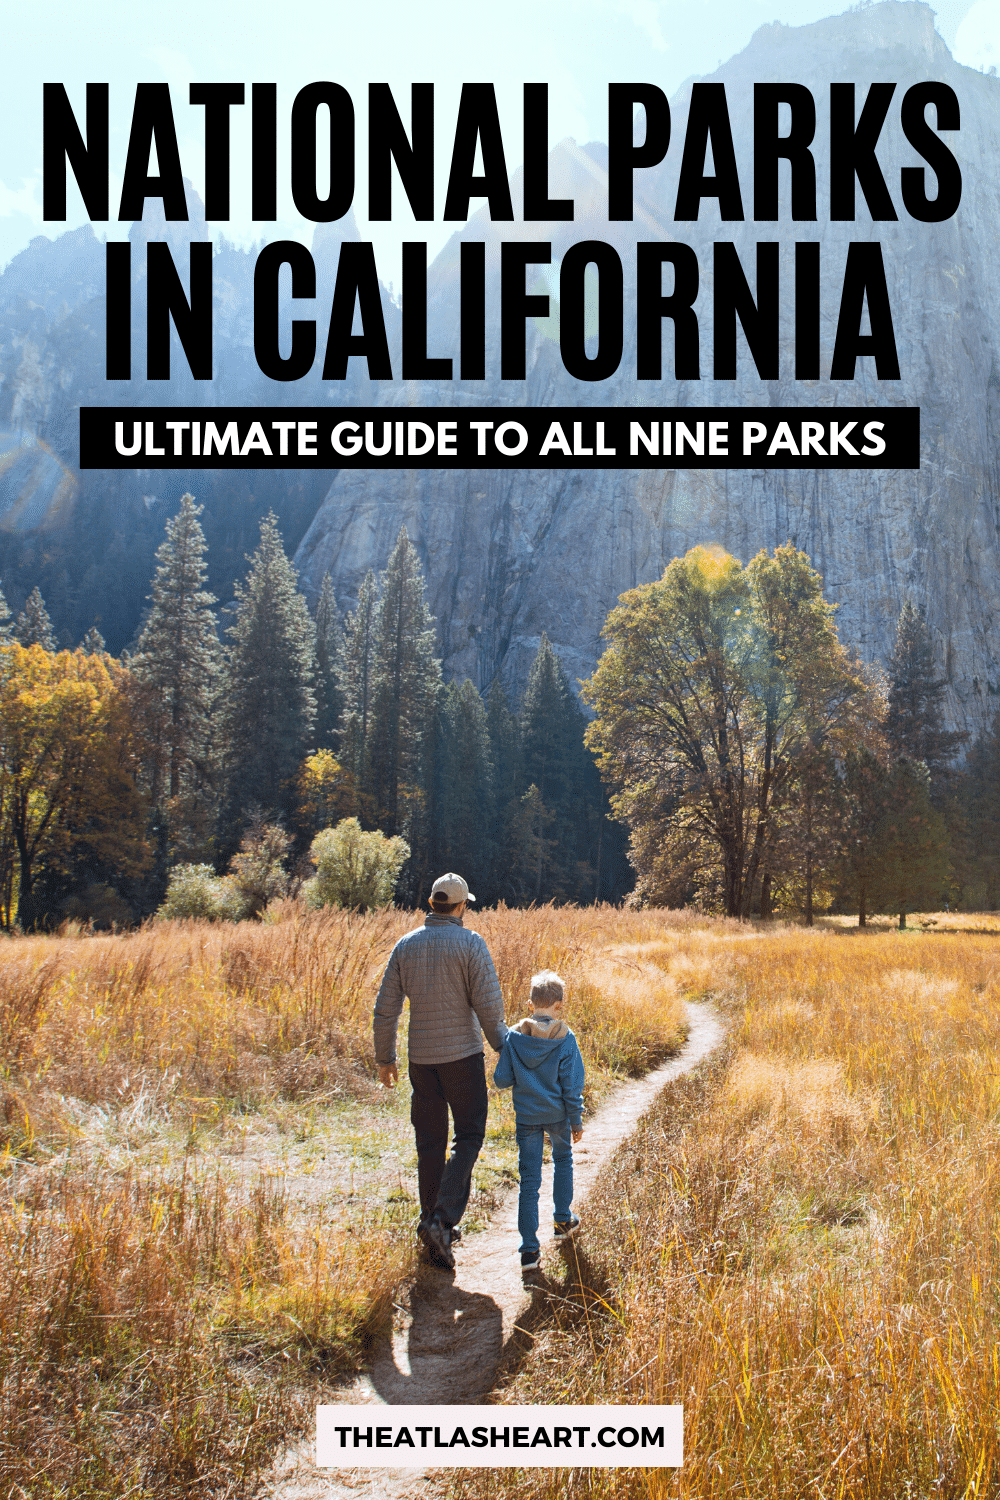 National Parks in California: Ultimate Guide to Nine National Parks